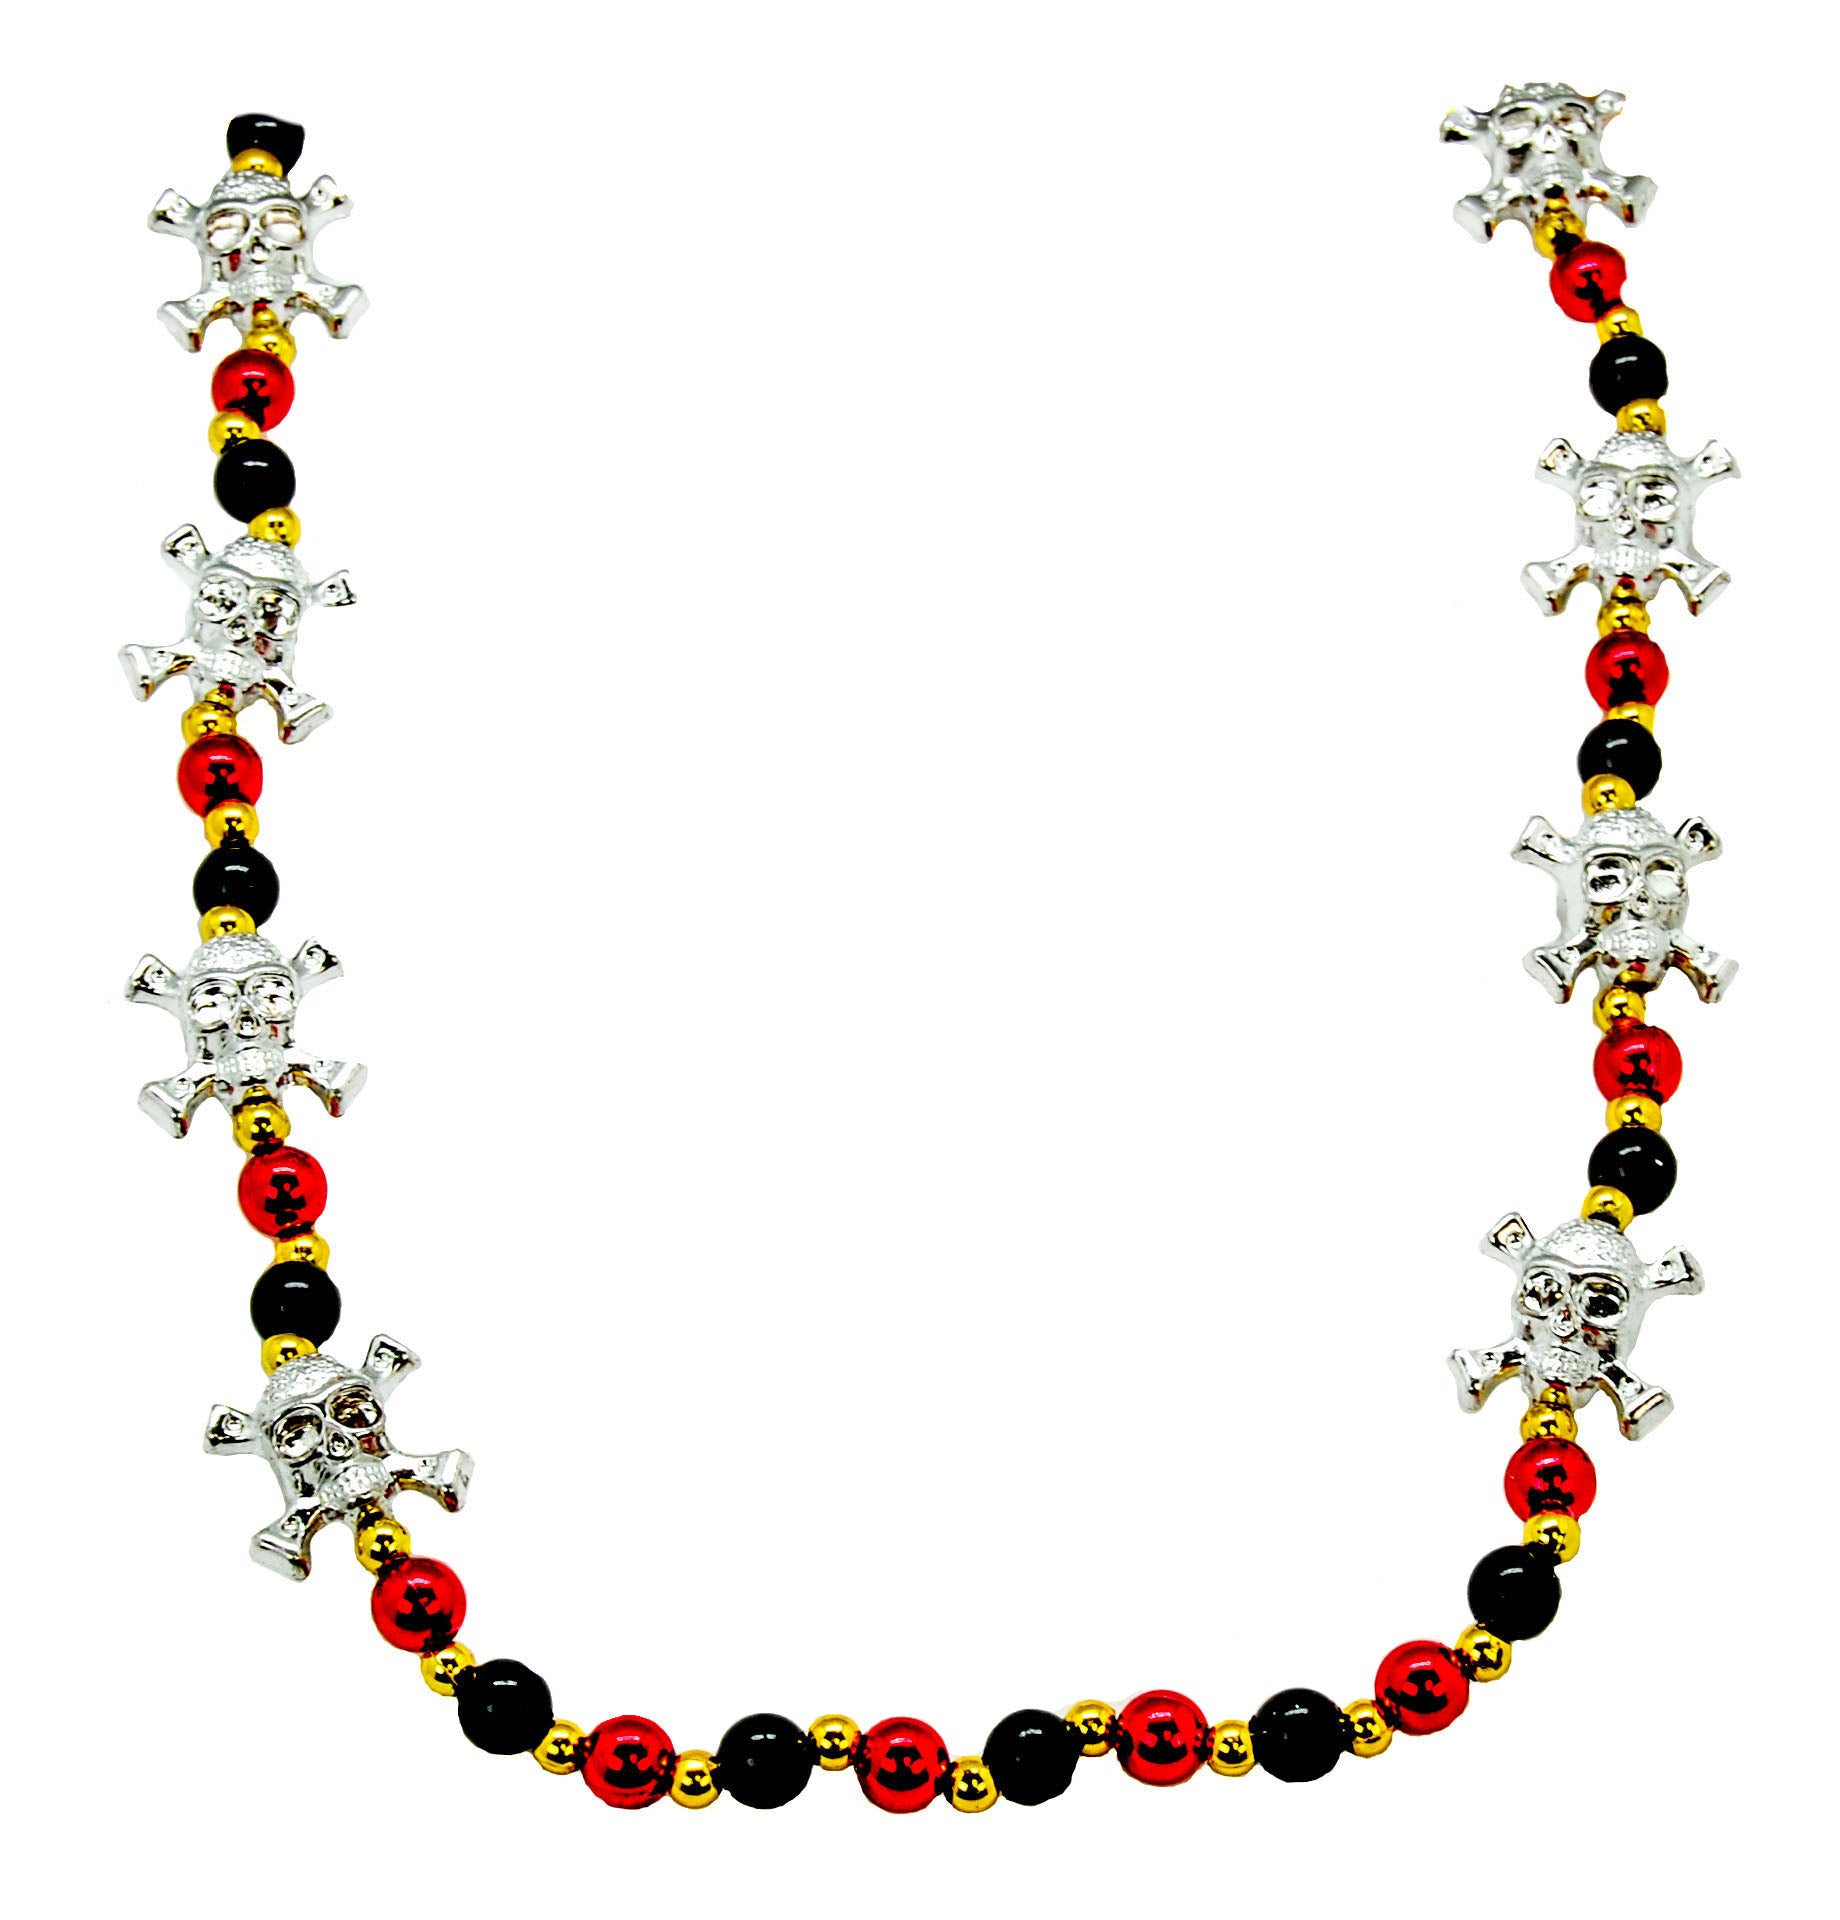 Hand-Painted Pirate Skull Beads from Beads by the Dozen, New Orleans